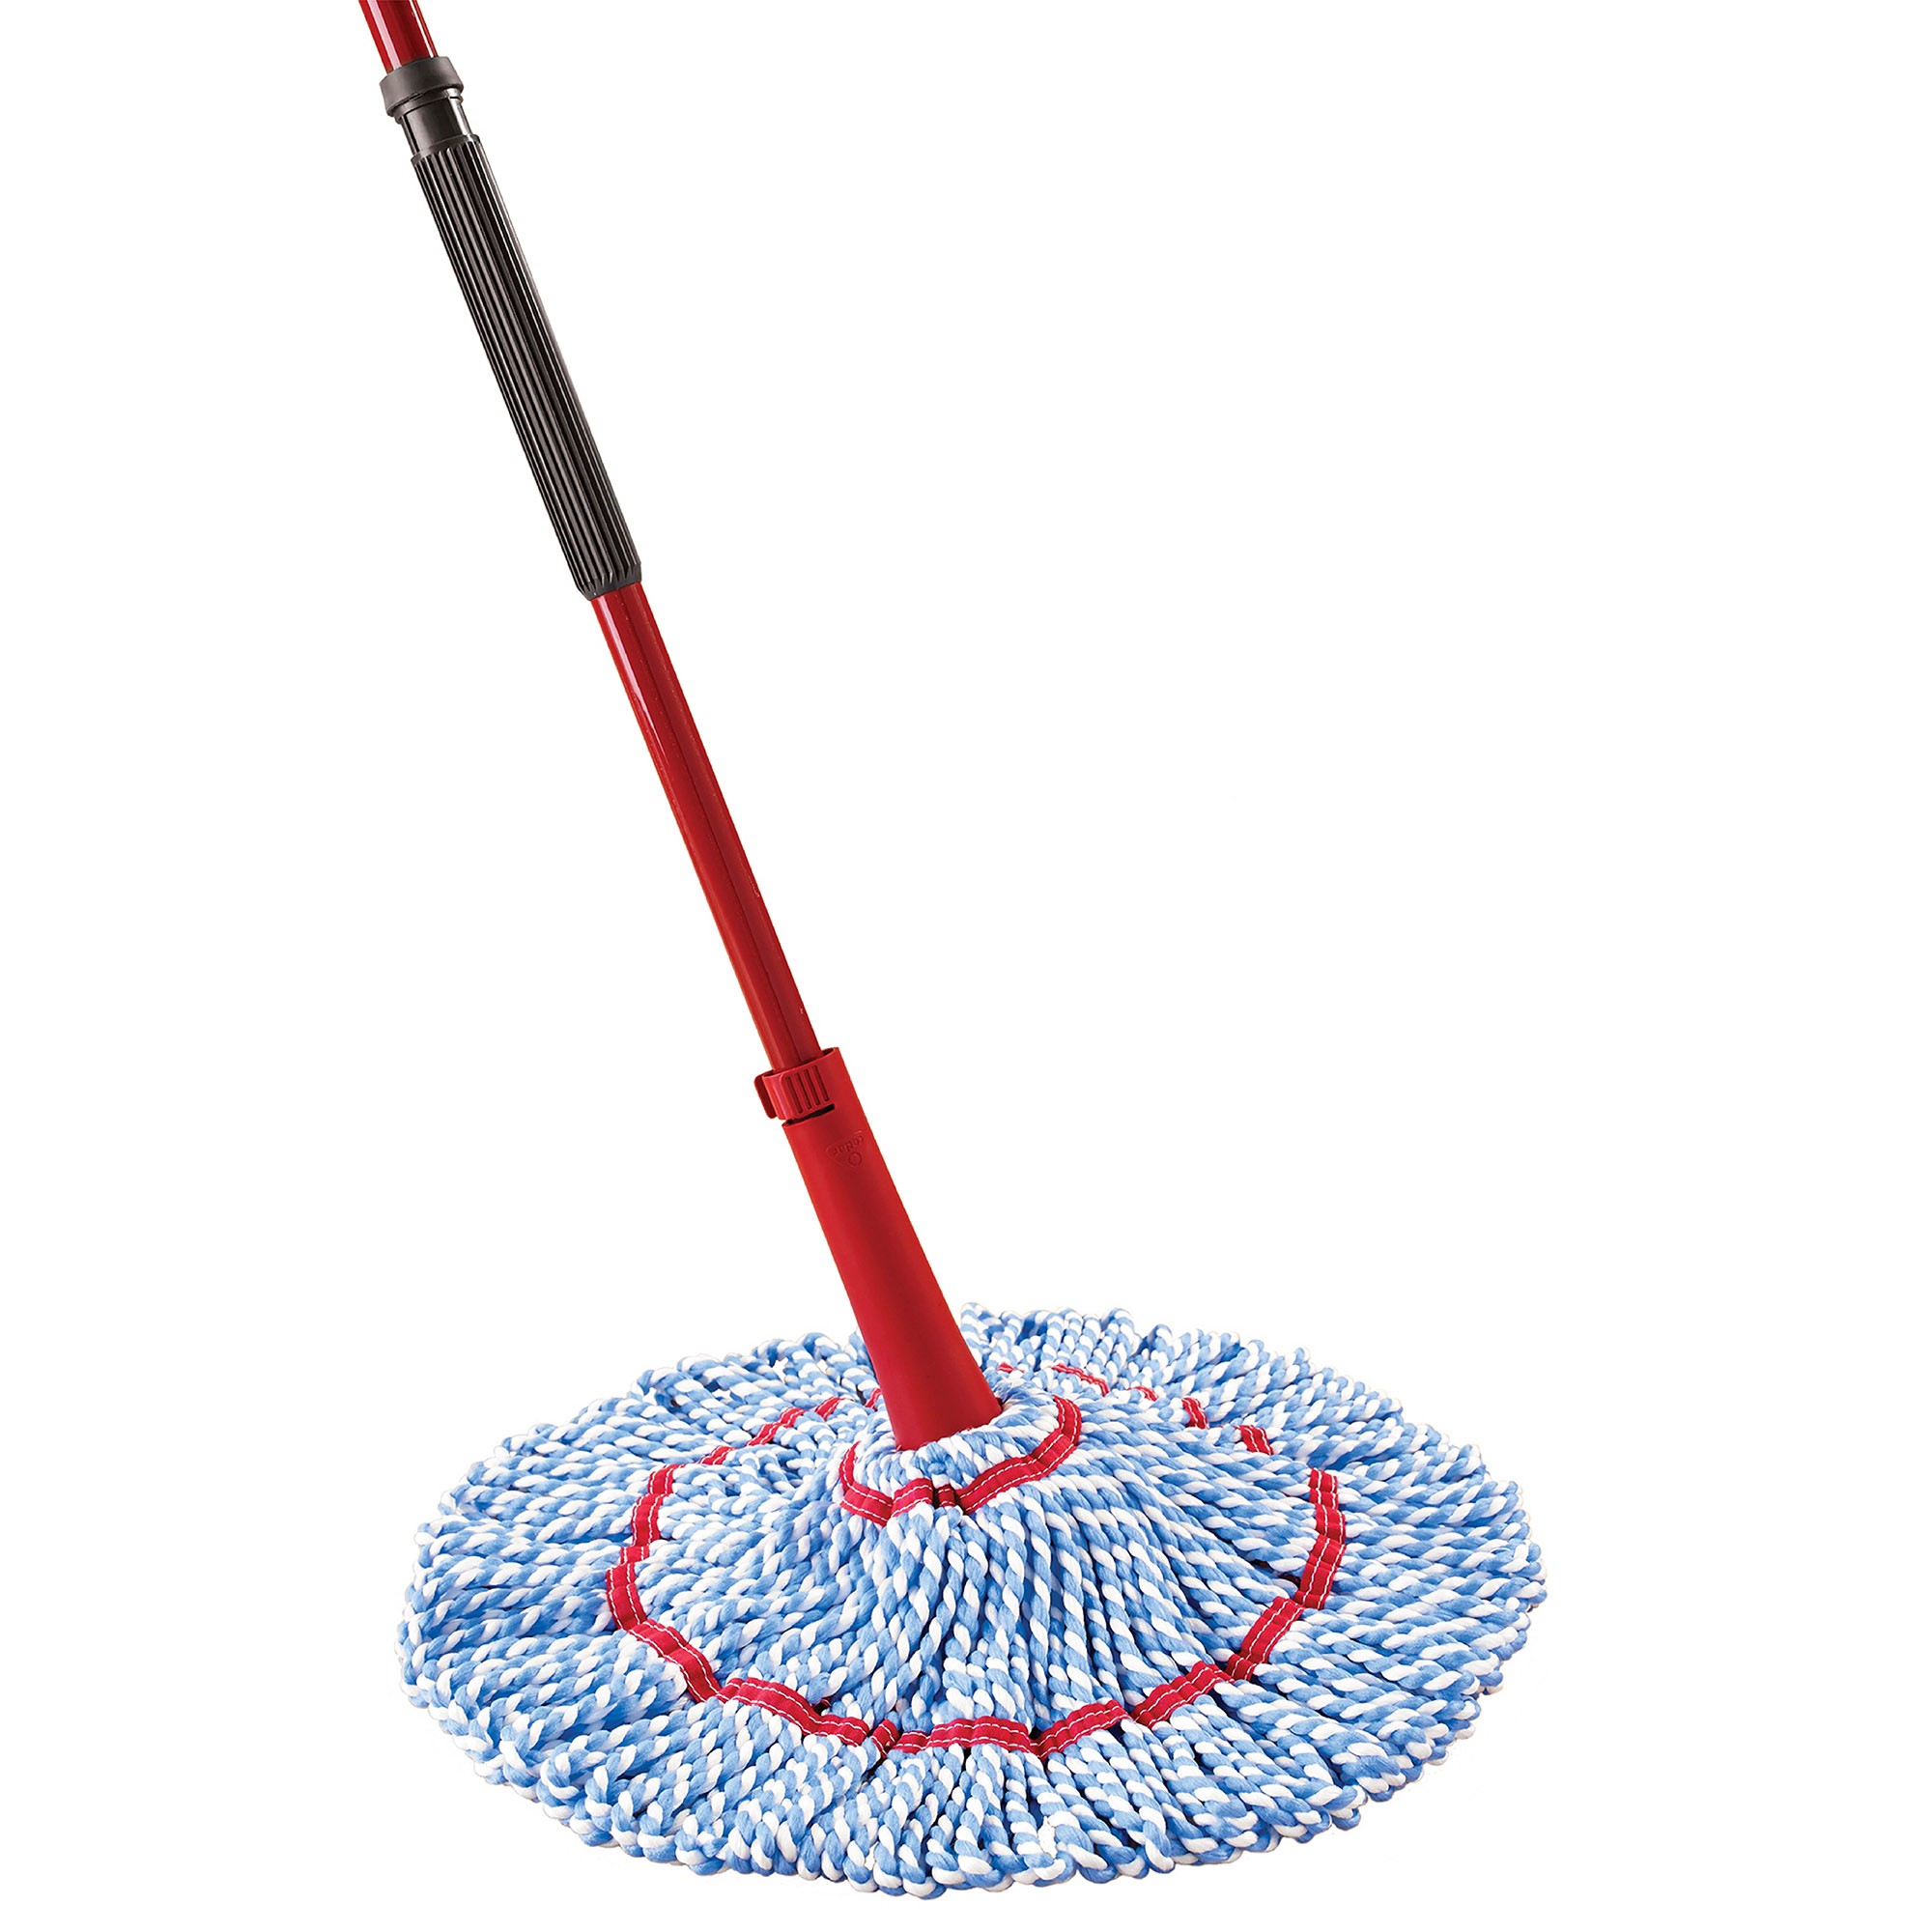 O-Cedar MicroTwist™ MAX Microfiber Mop, Removes 99% of Bacteria with Just Water - image 3 of 18